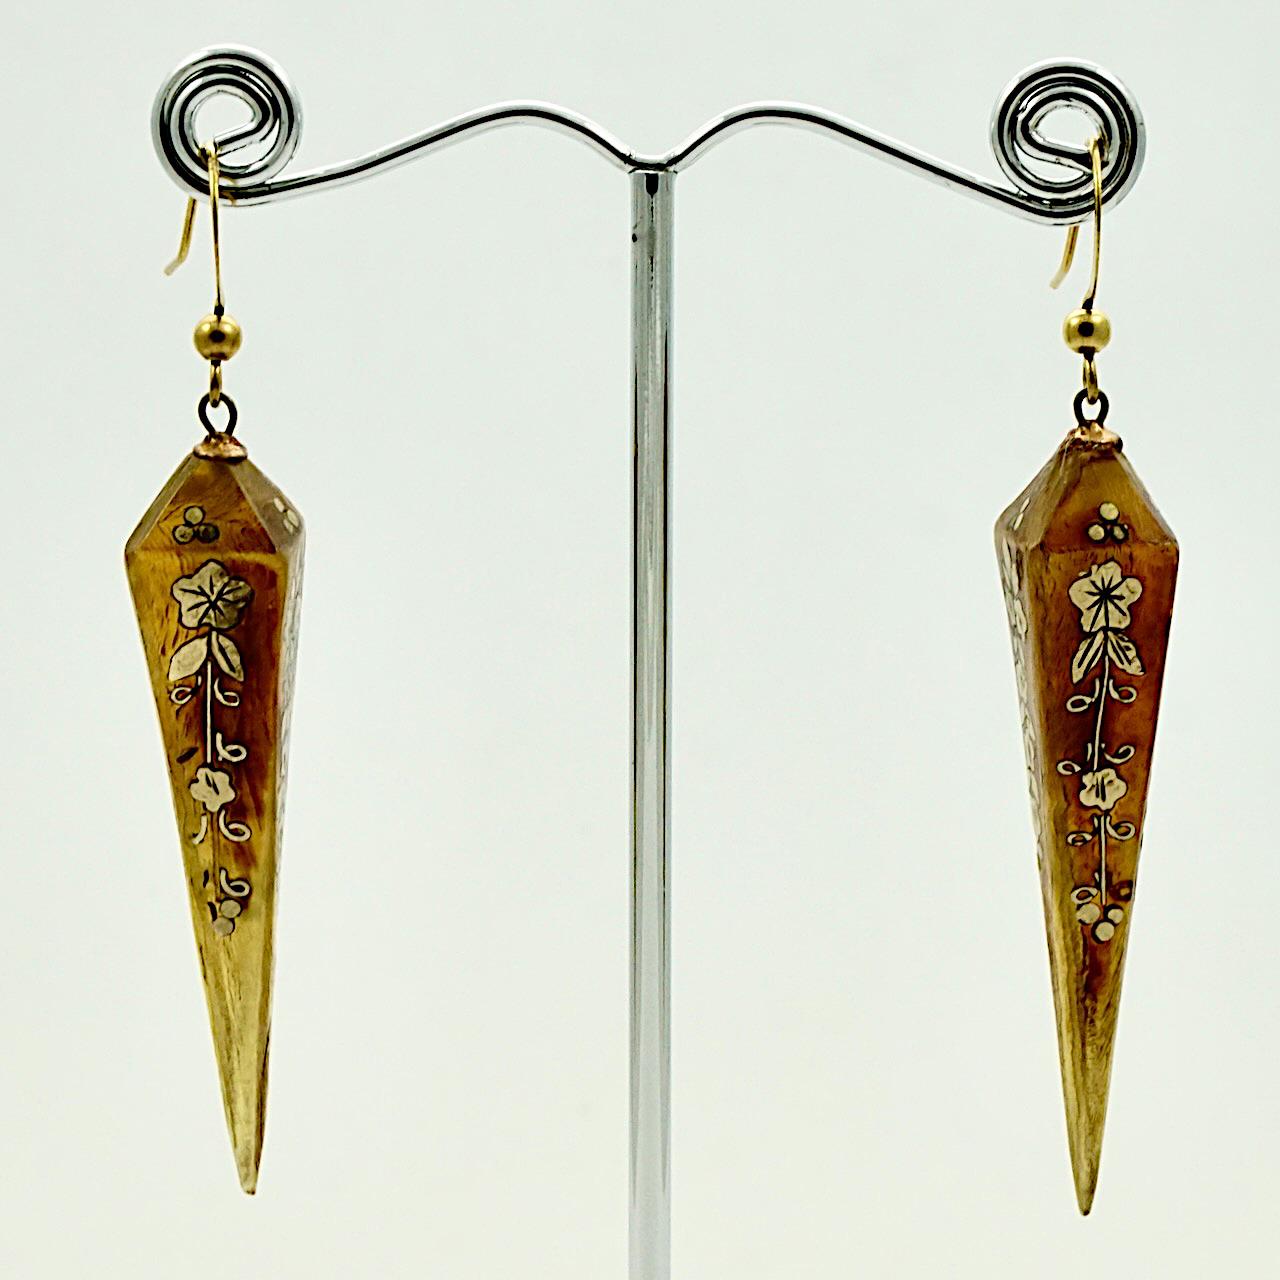 Antique Torpedo Drop Earrings Inlaid Flower Scroll Design Brass Hooks In Good Condition For Sale In London, GB